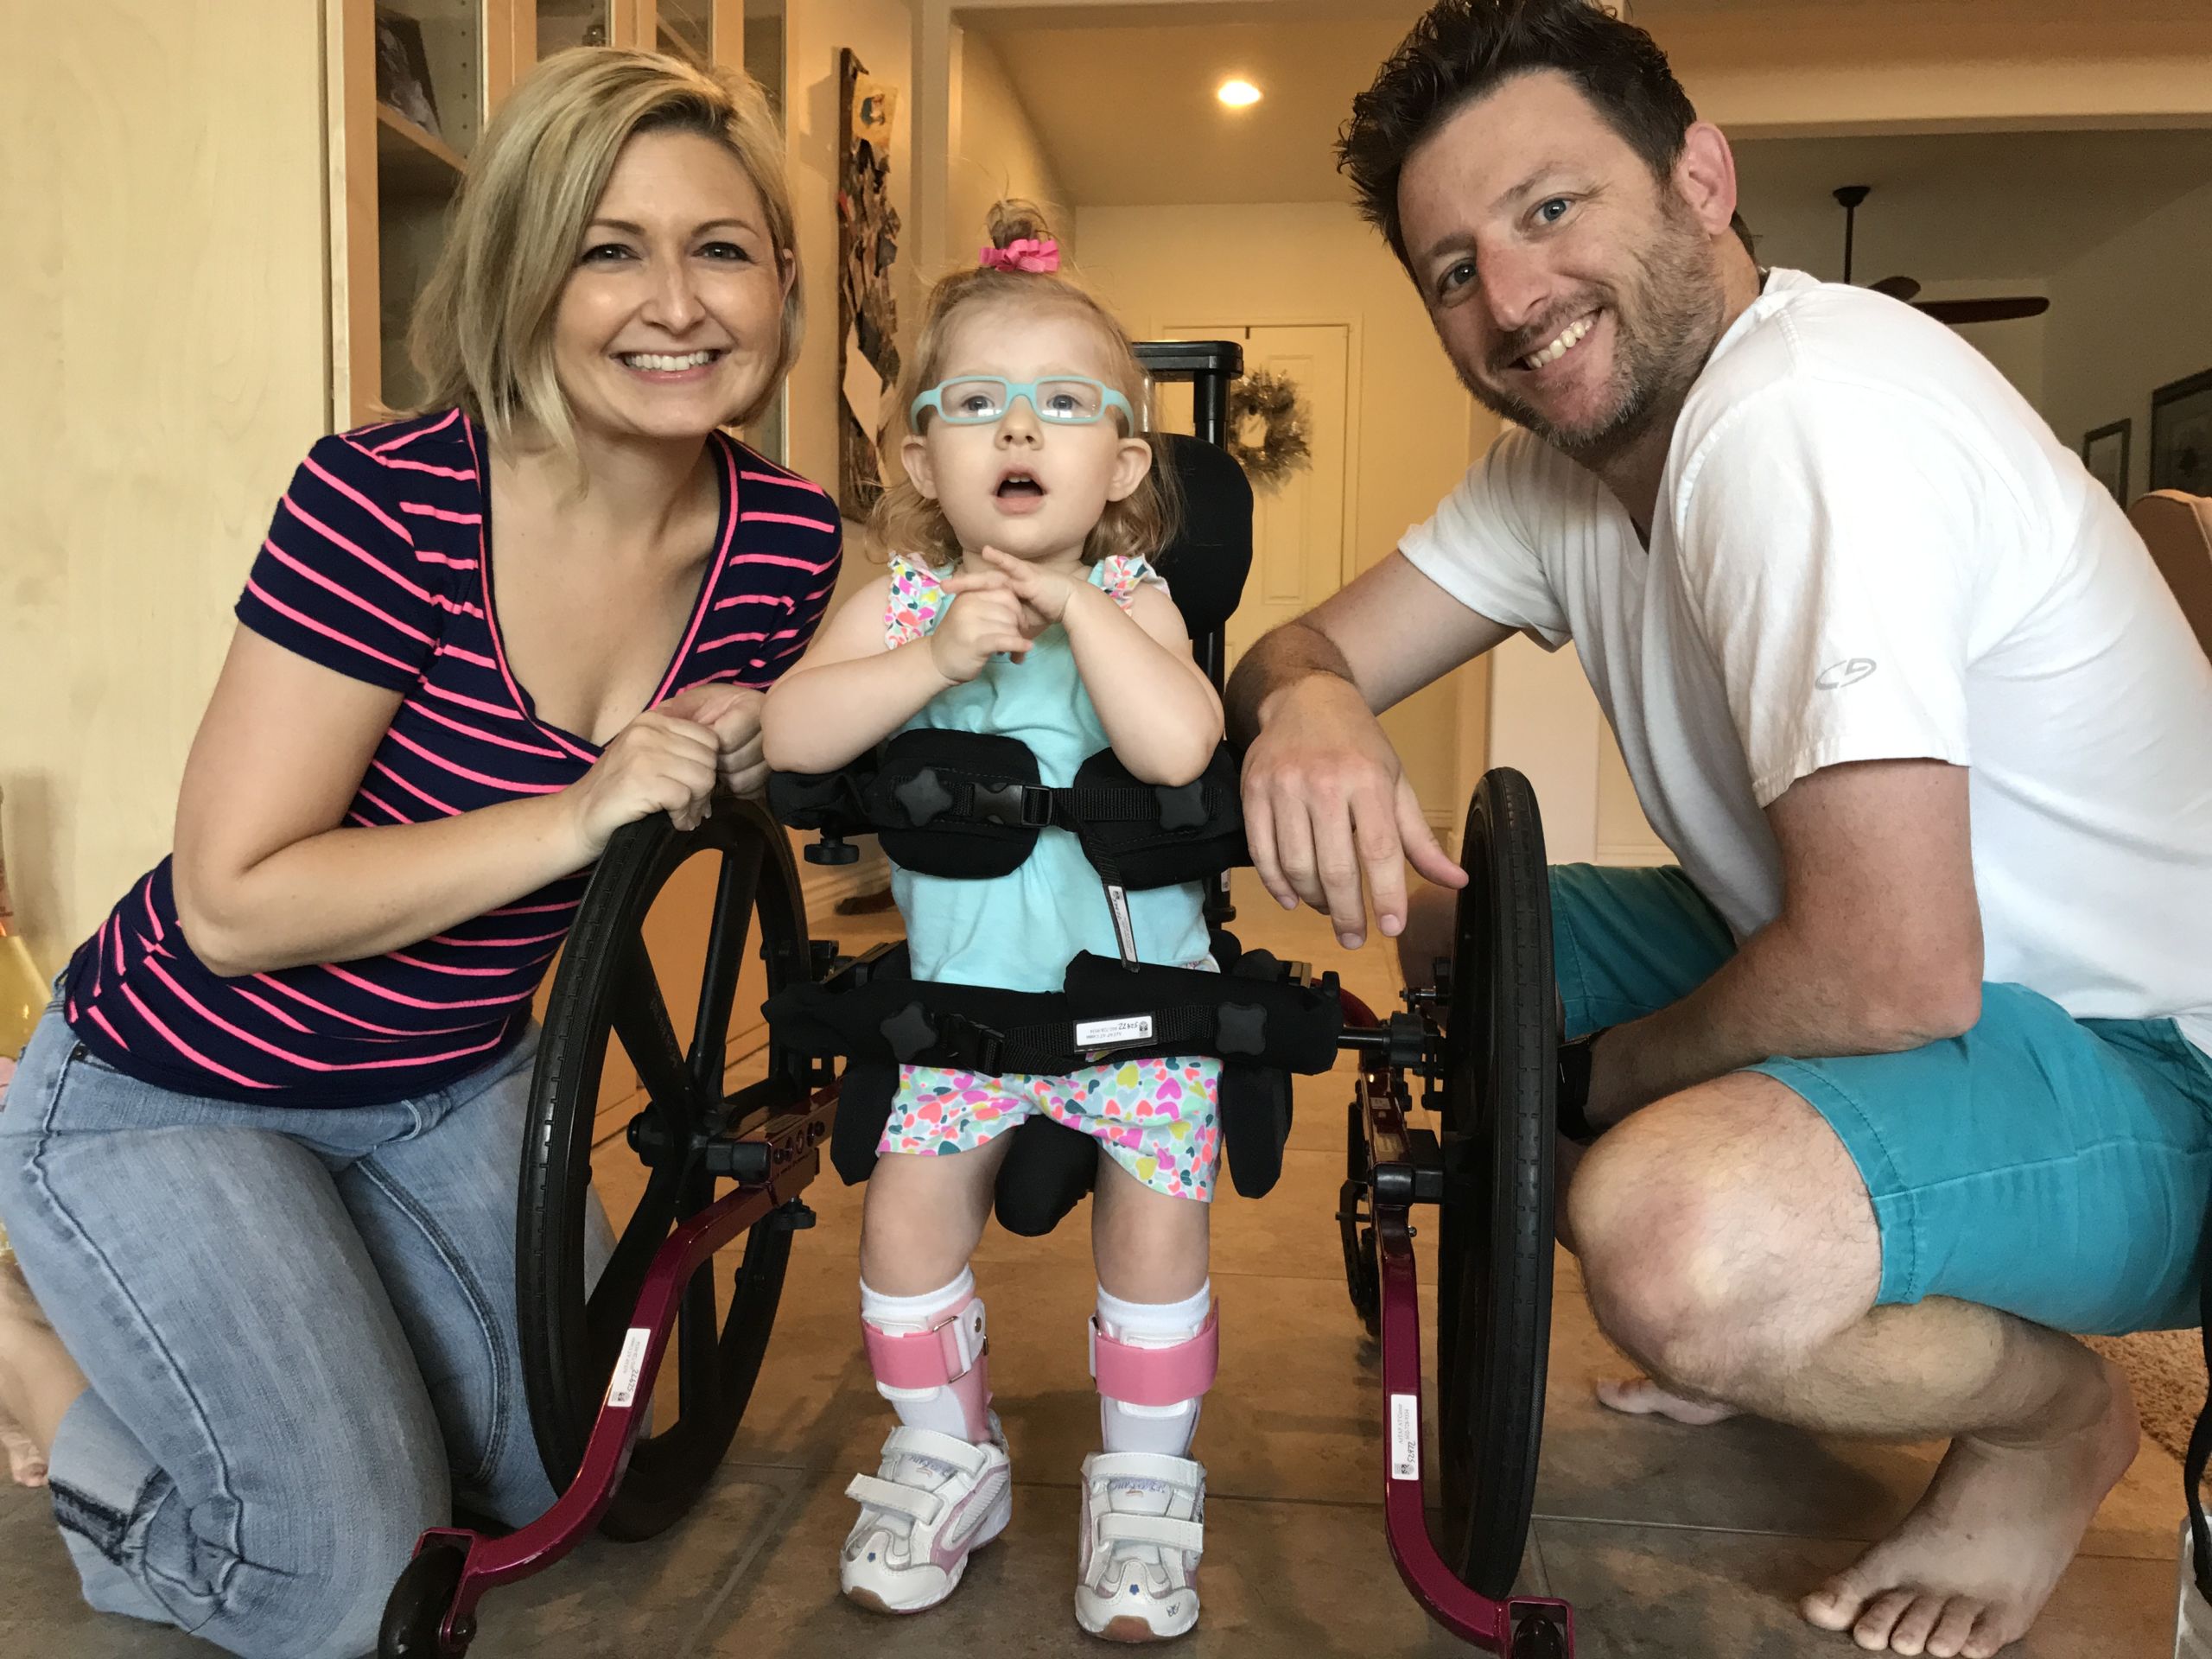 A little girl standing supported by a wheeled gait-trainer device for walking and flanked by her smiling parents.